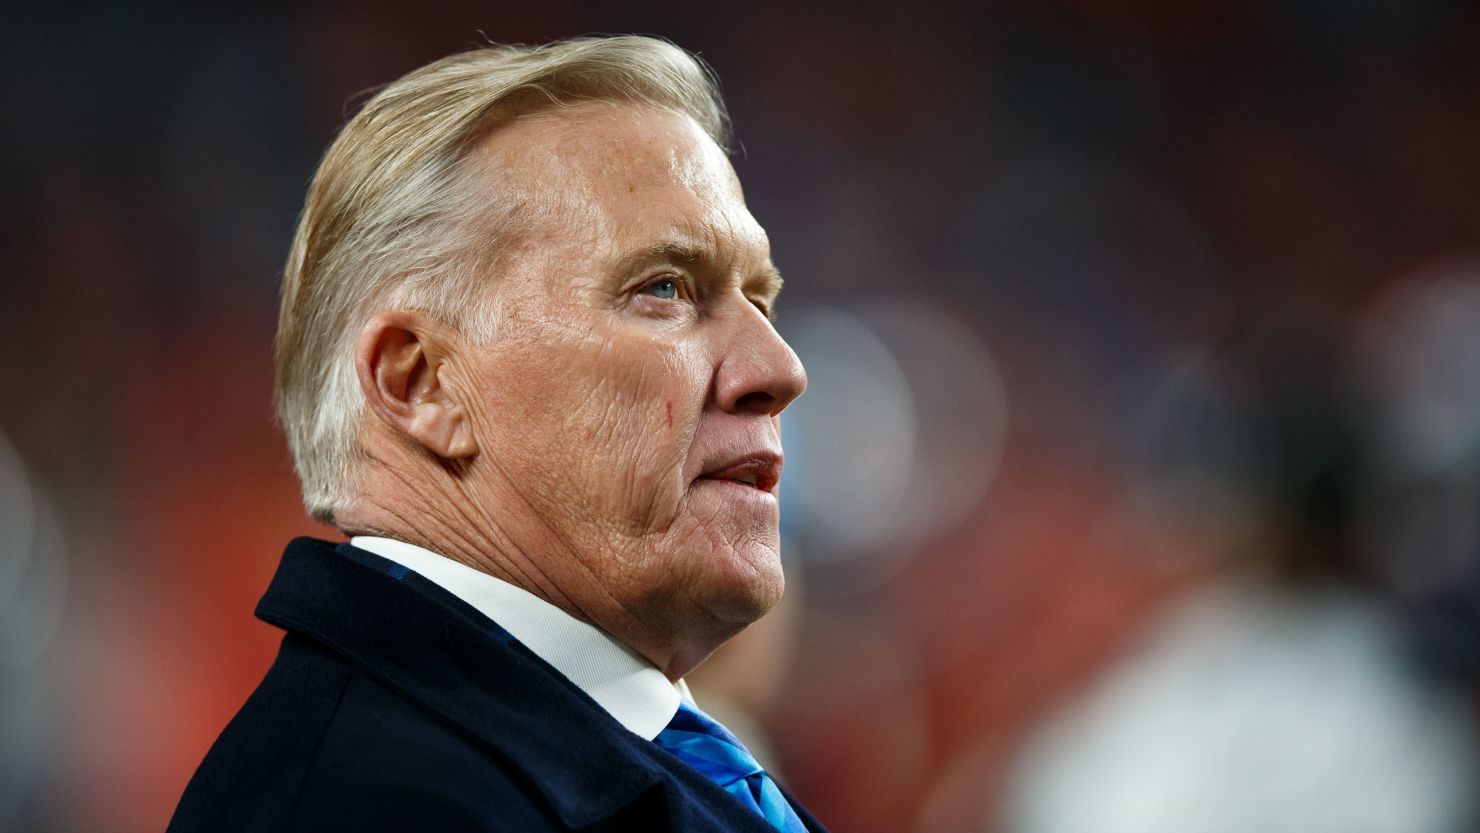 The Denver Broncos' John Elway has tested positive for Covid-19.